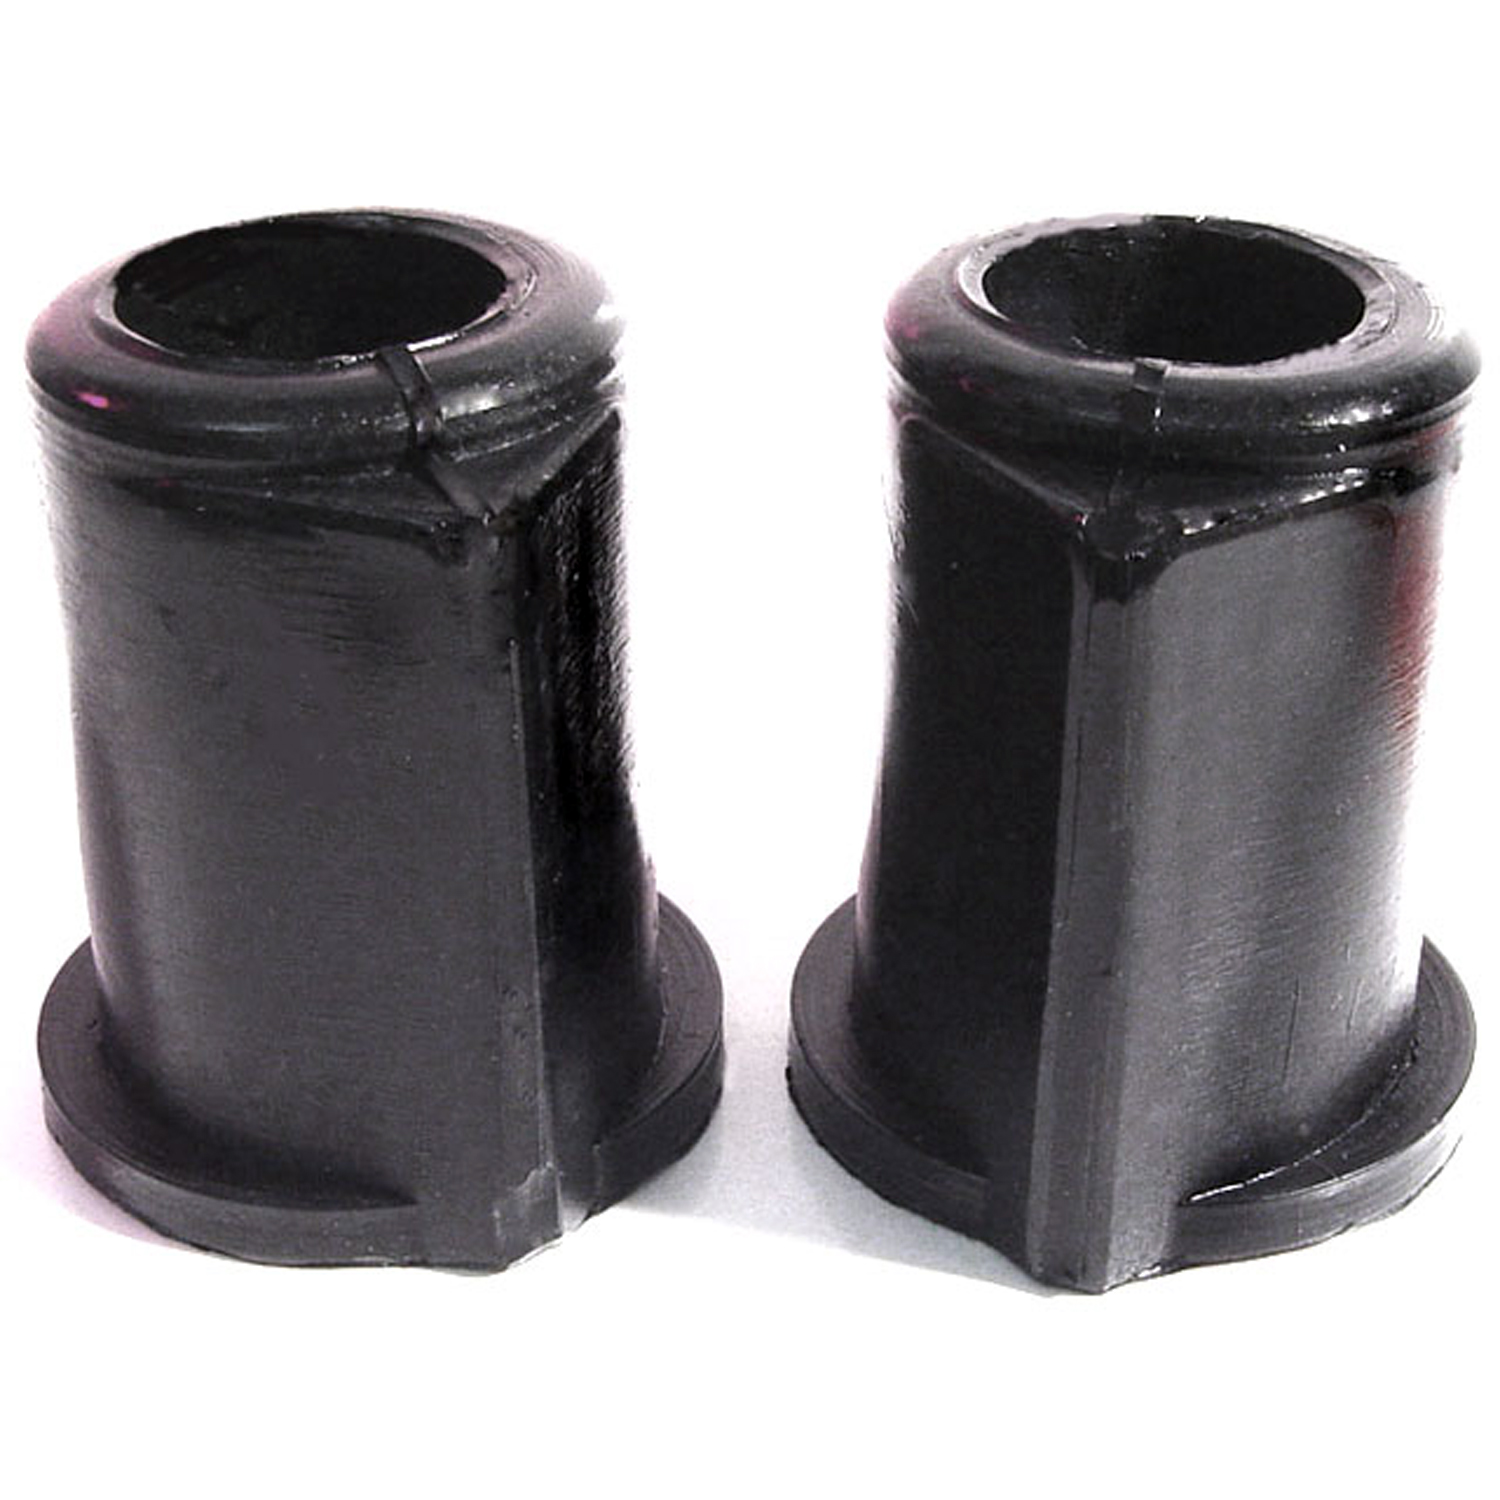 1947 Lincoln 76H Series Sway Bar Bushings.  Made with cloth reinforcement-BN 32-C